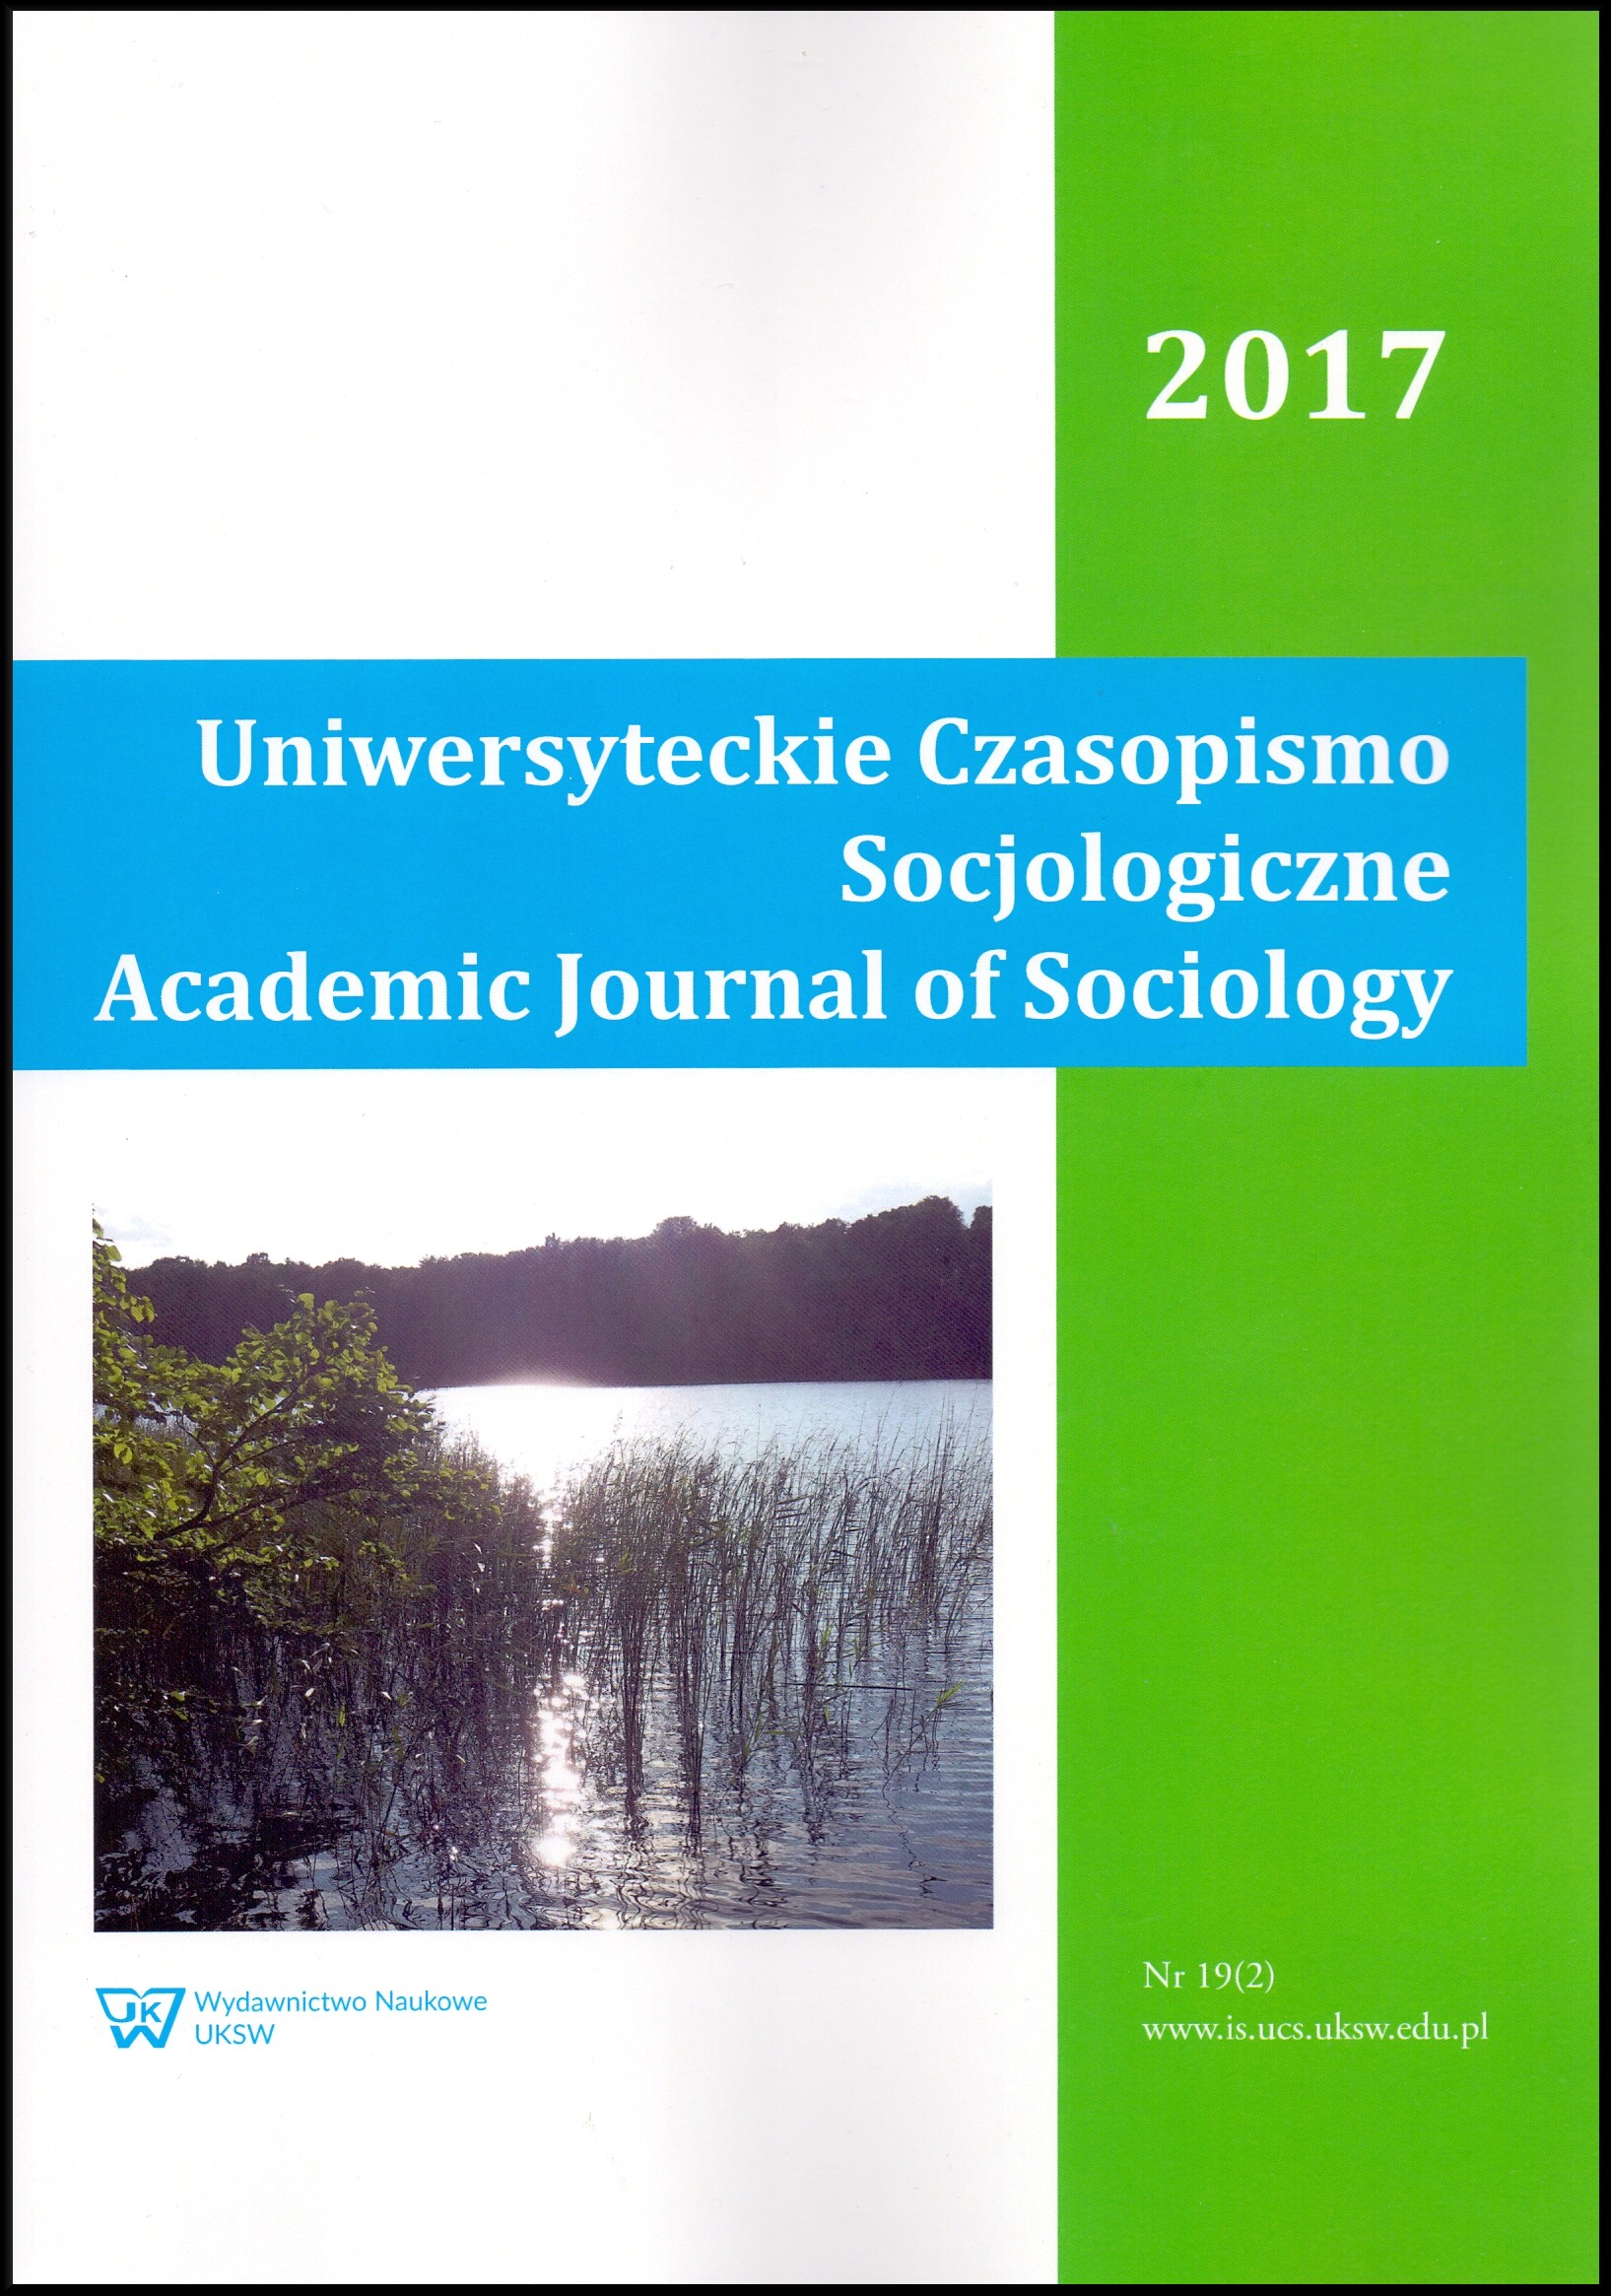 Environmental attitudes of academic youth on the basis on the opinion poll on the 2016 Kampinos National Park Cover Image